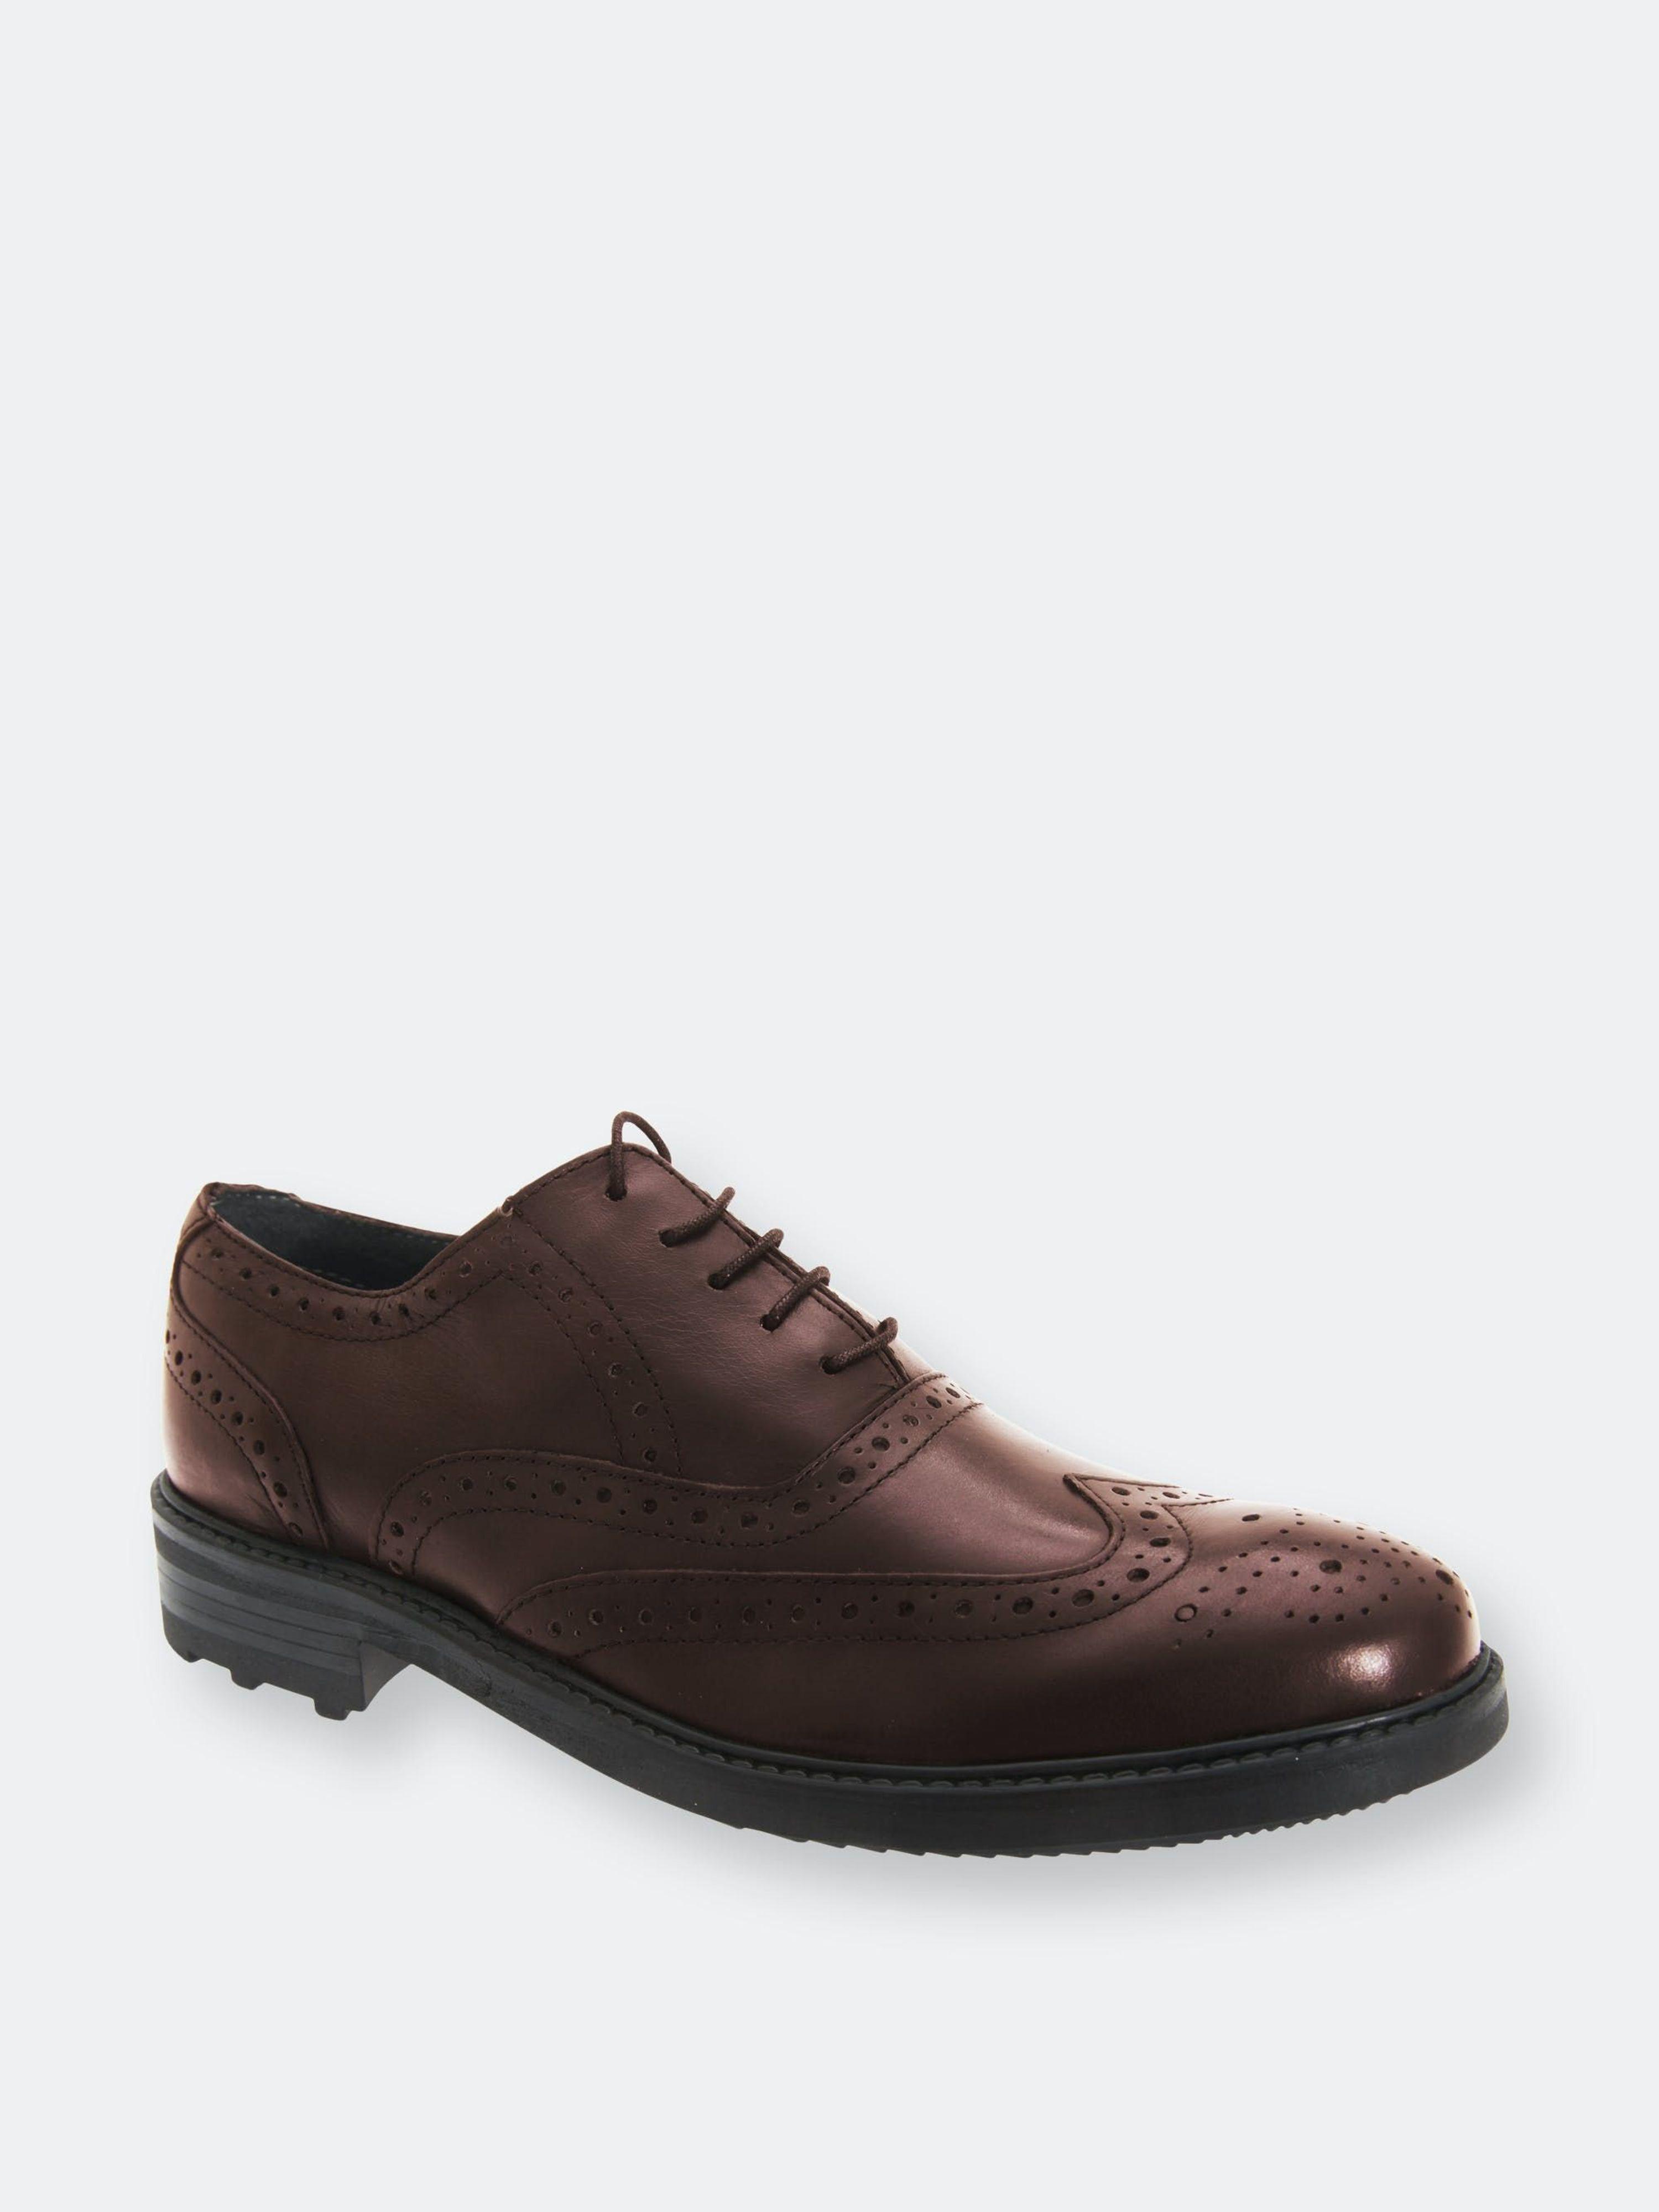 Roamers 5 Eyelet Brogue Oxford Leather Shoes in Brown for Men | Lyst